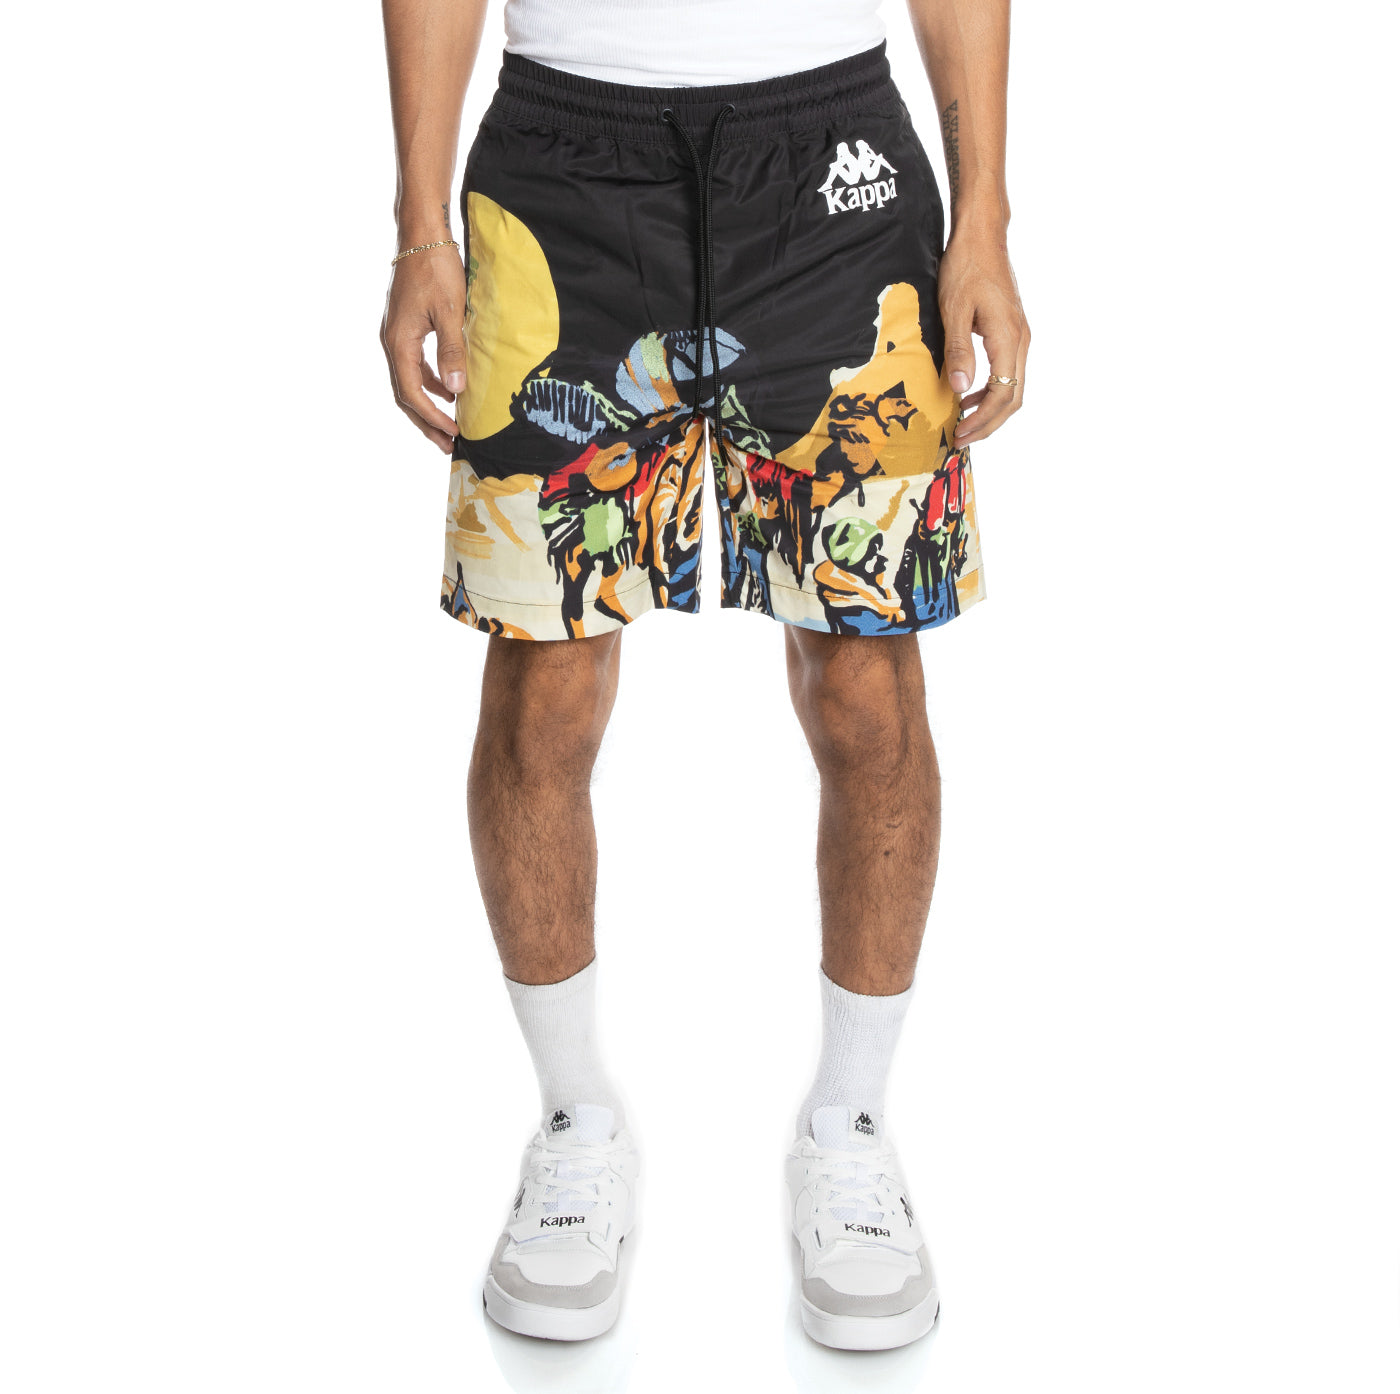 Kappa Men's Authentic Oasis Shorts in Jet Black. Front view.